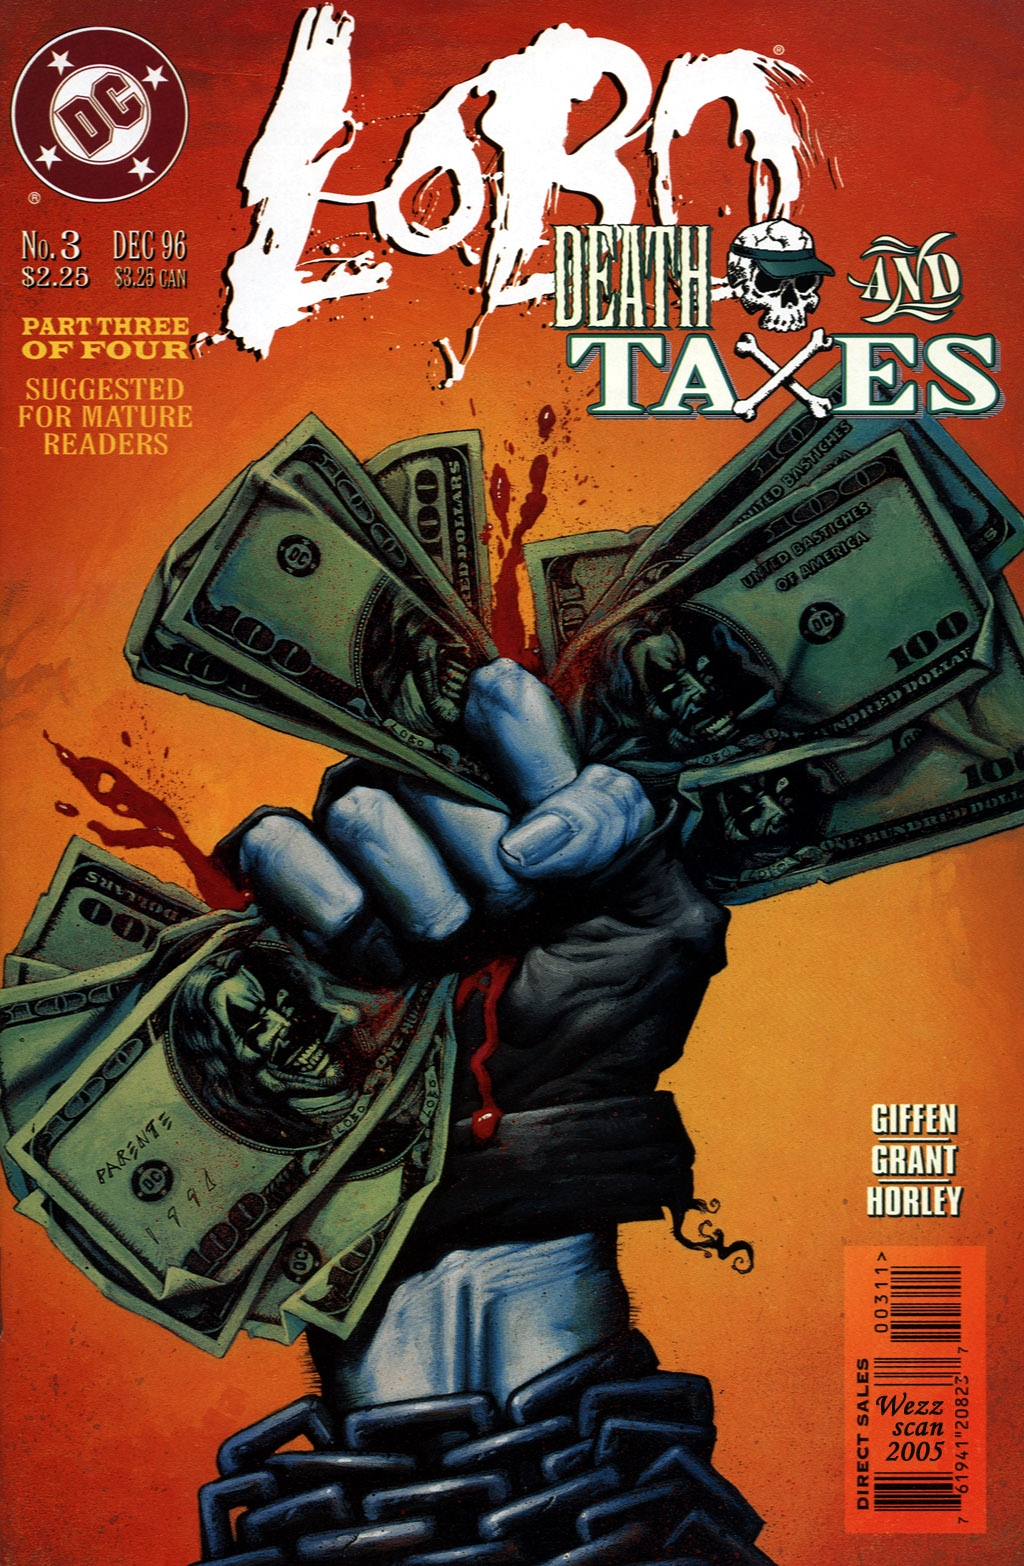 Read online Lobo: Death and Taxes comic -  Issue #3 - 1